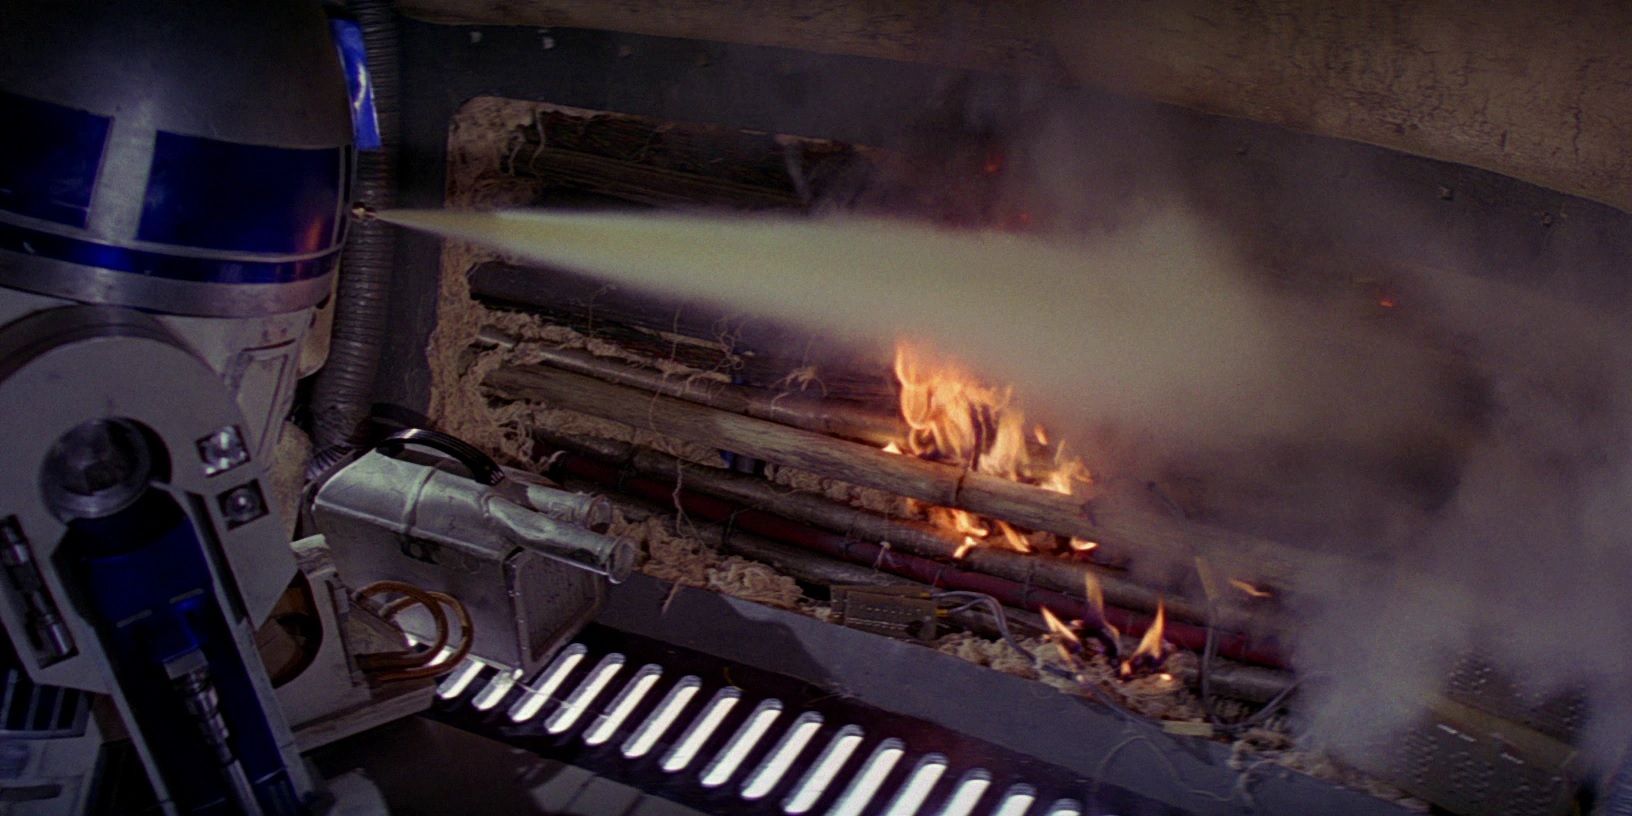 R2-D2 using his fire extinguisher in Star Wars